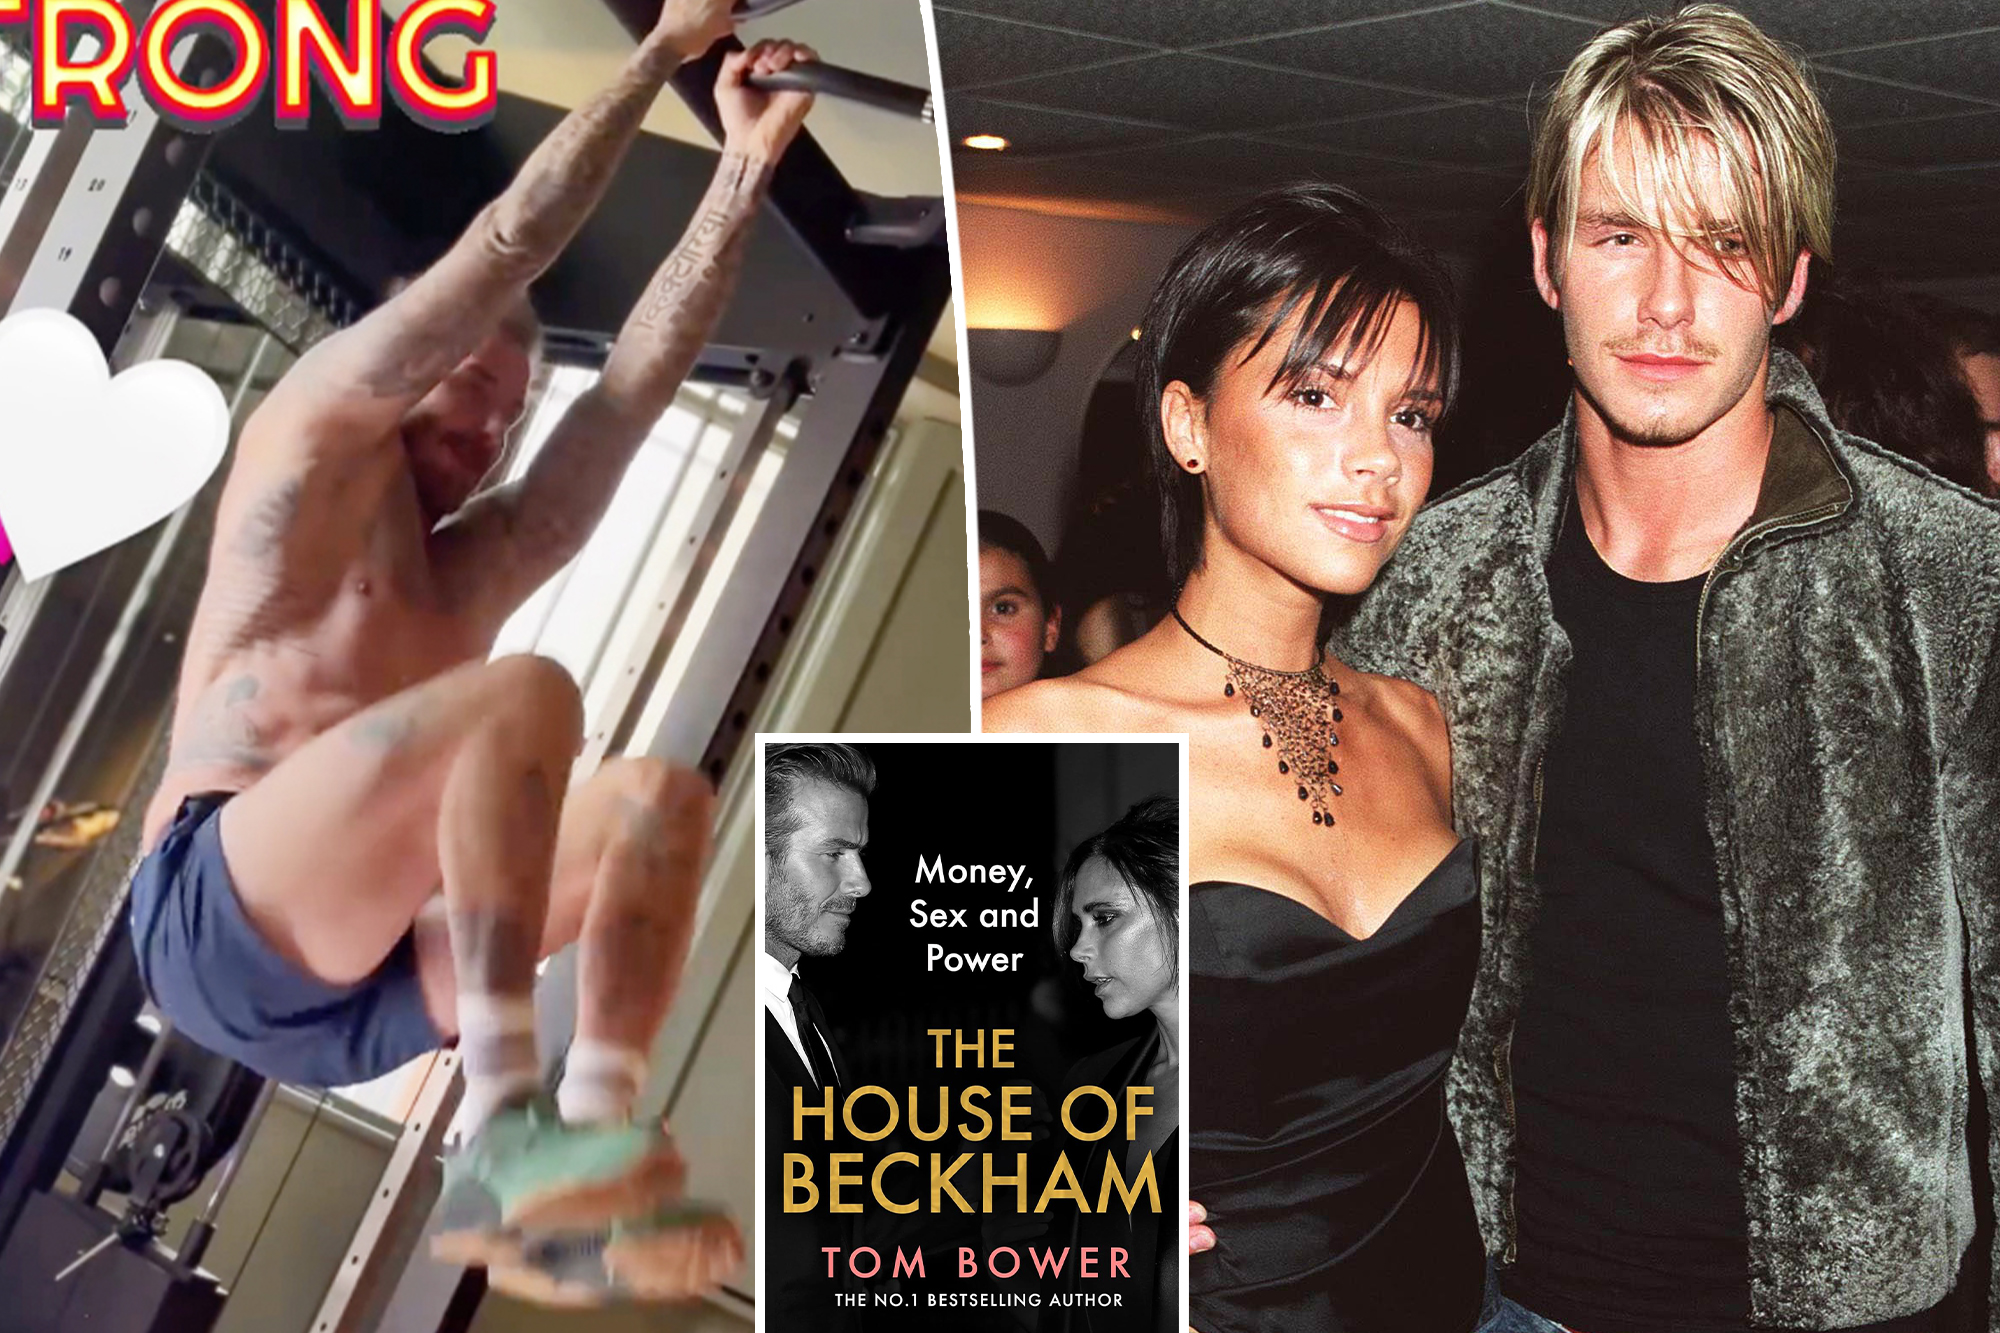 David Beckham's Steamy Shirtless Workout Video Sparks Controversy Amid Cheating Allegations Resurfacing